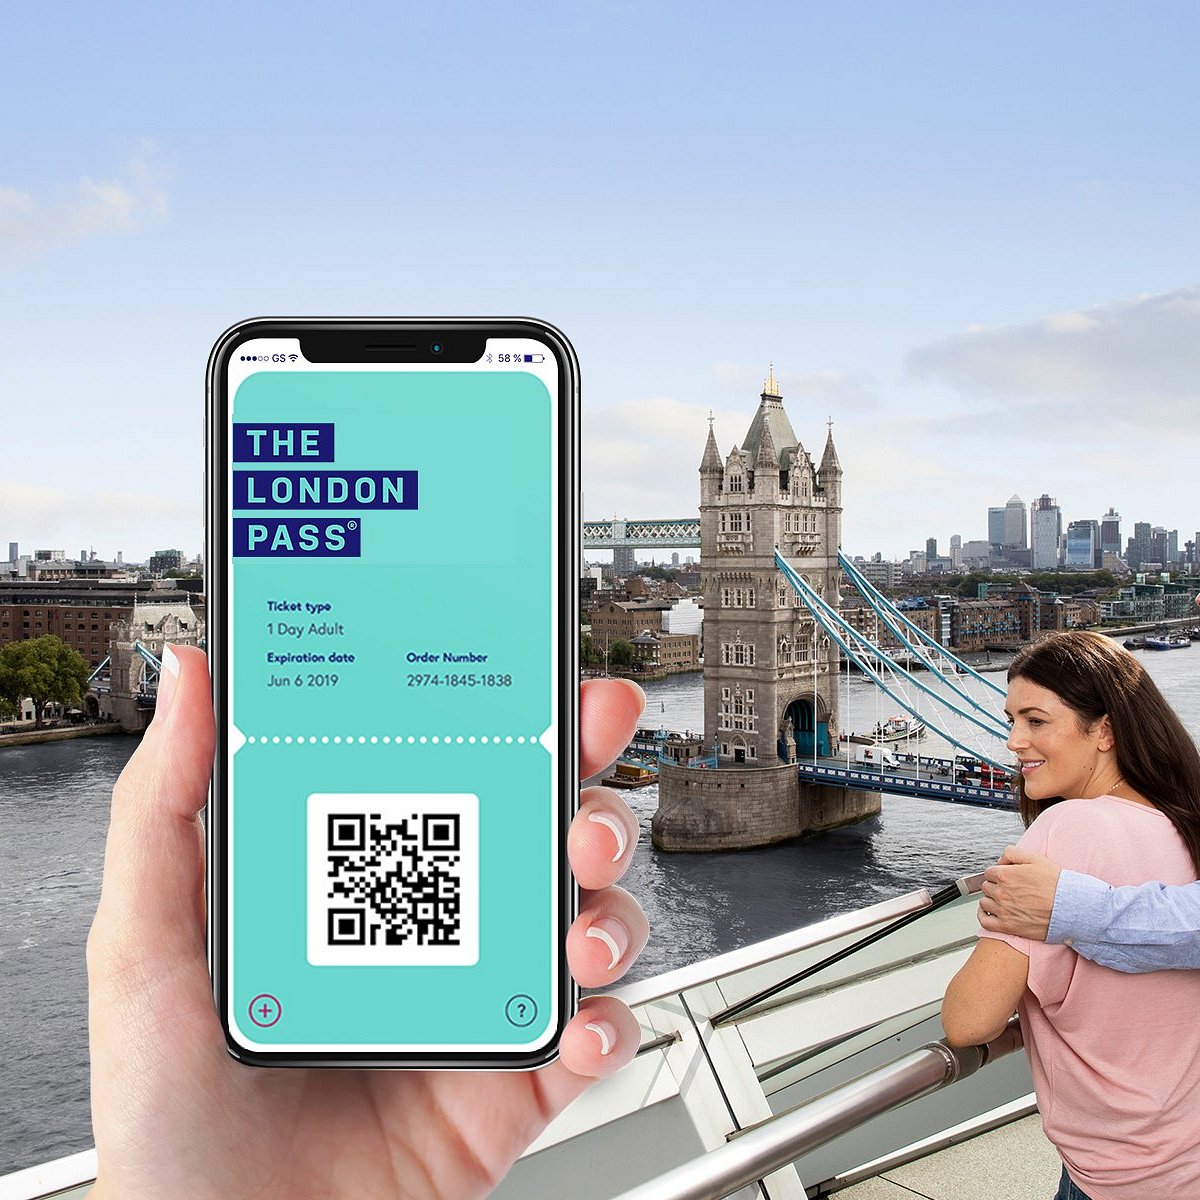 over 66 travel pass london